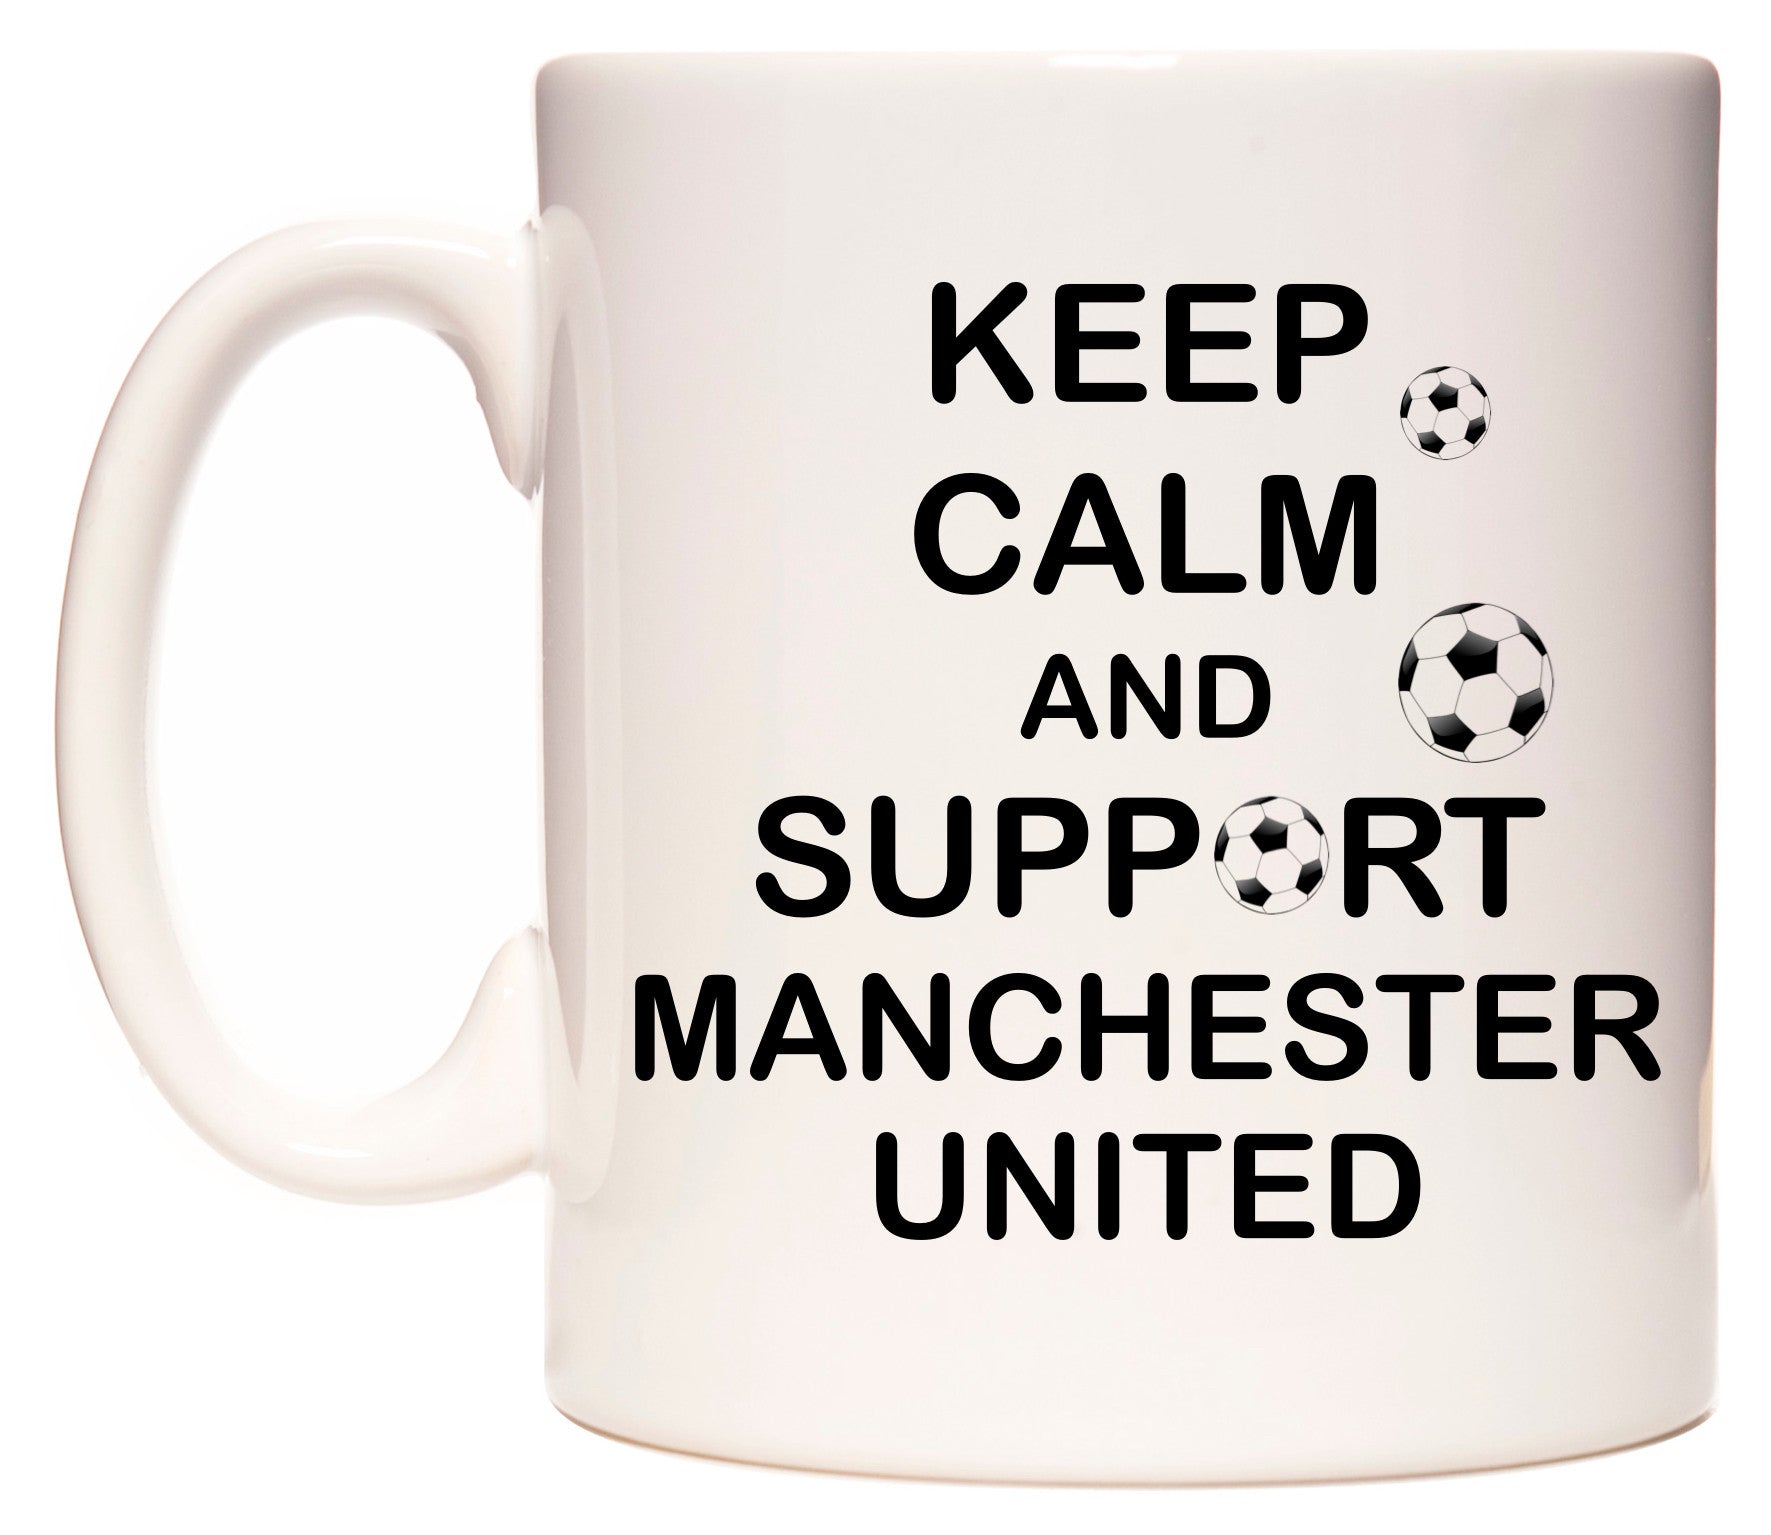 This mug features Keep Calm And Support Manchester United